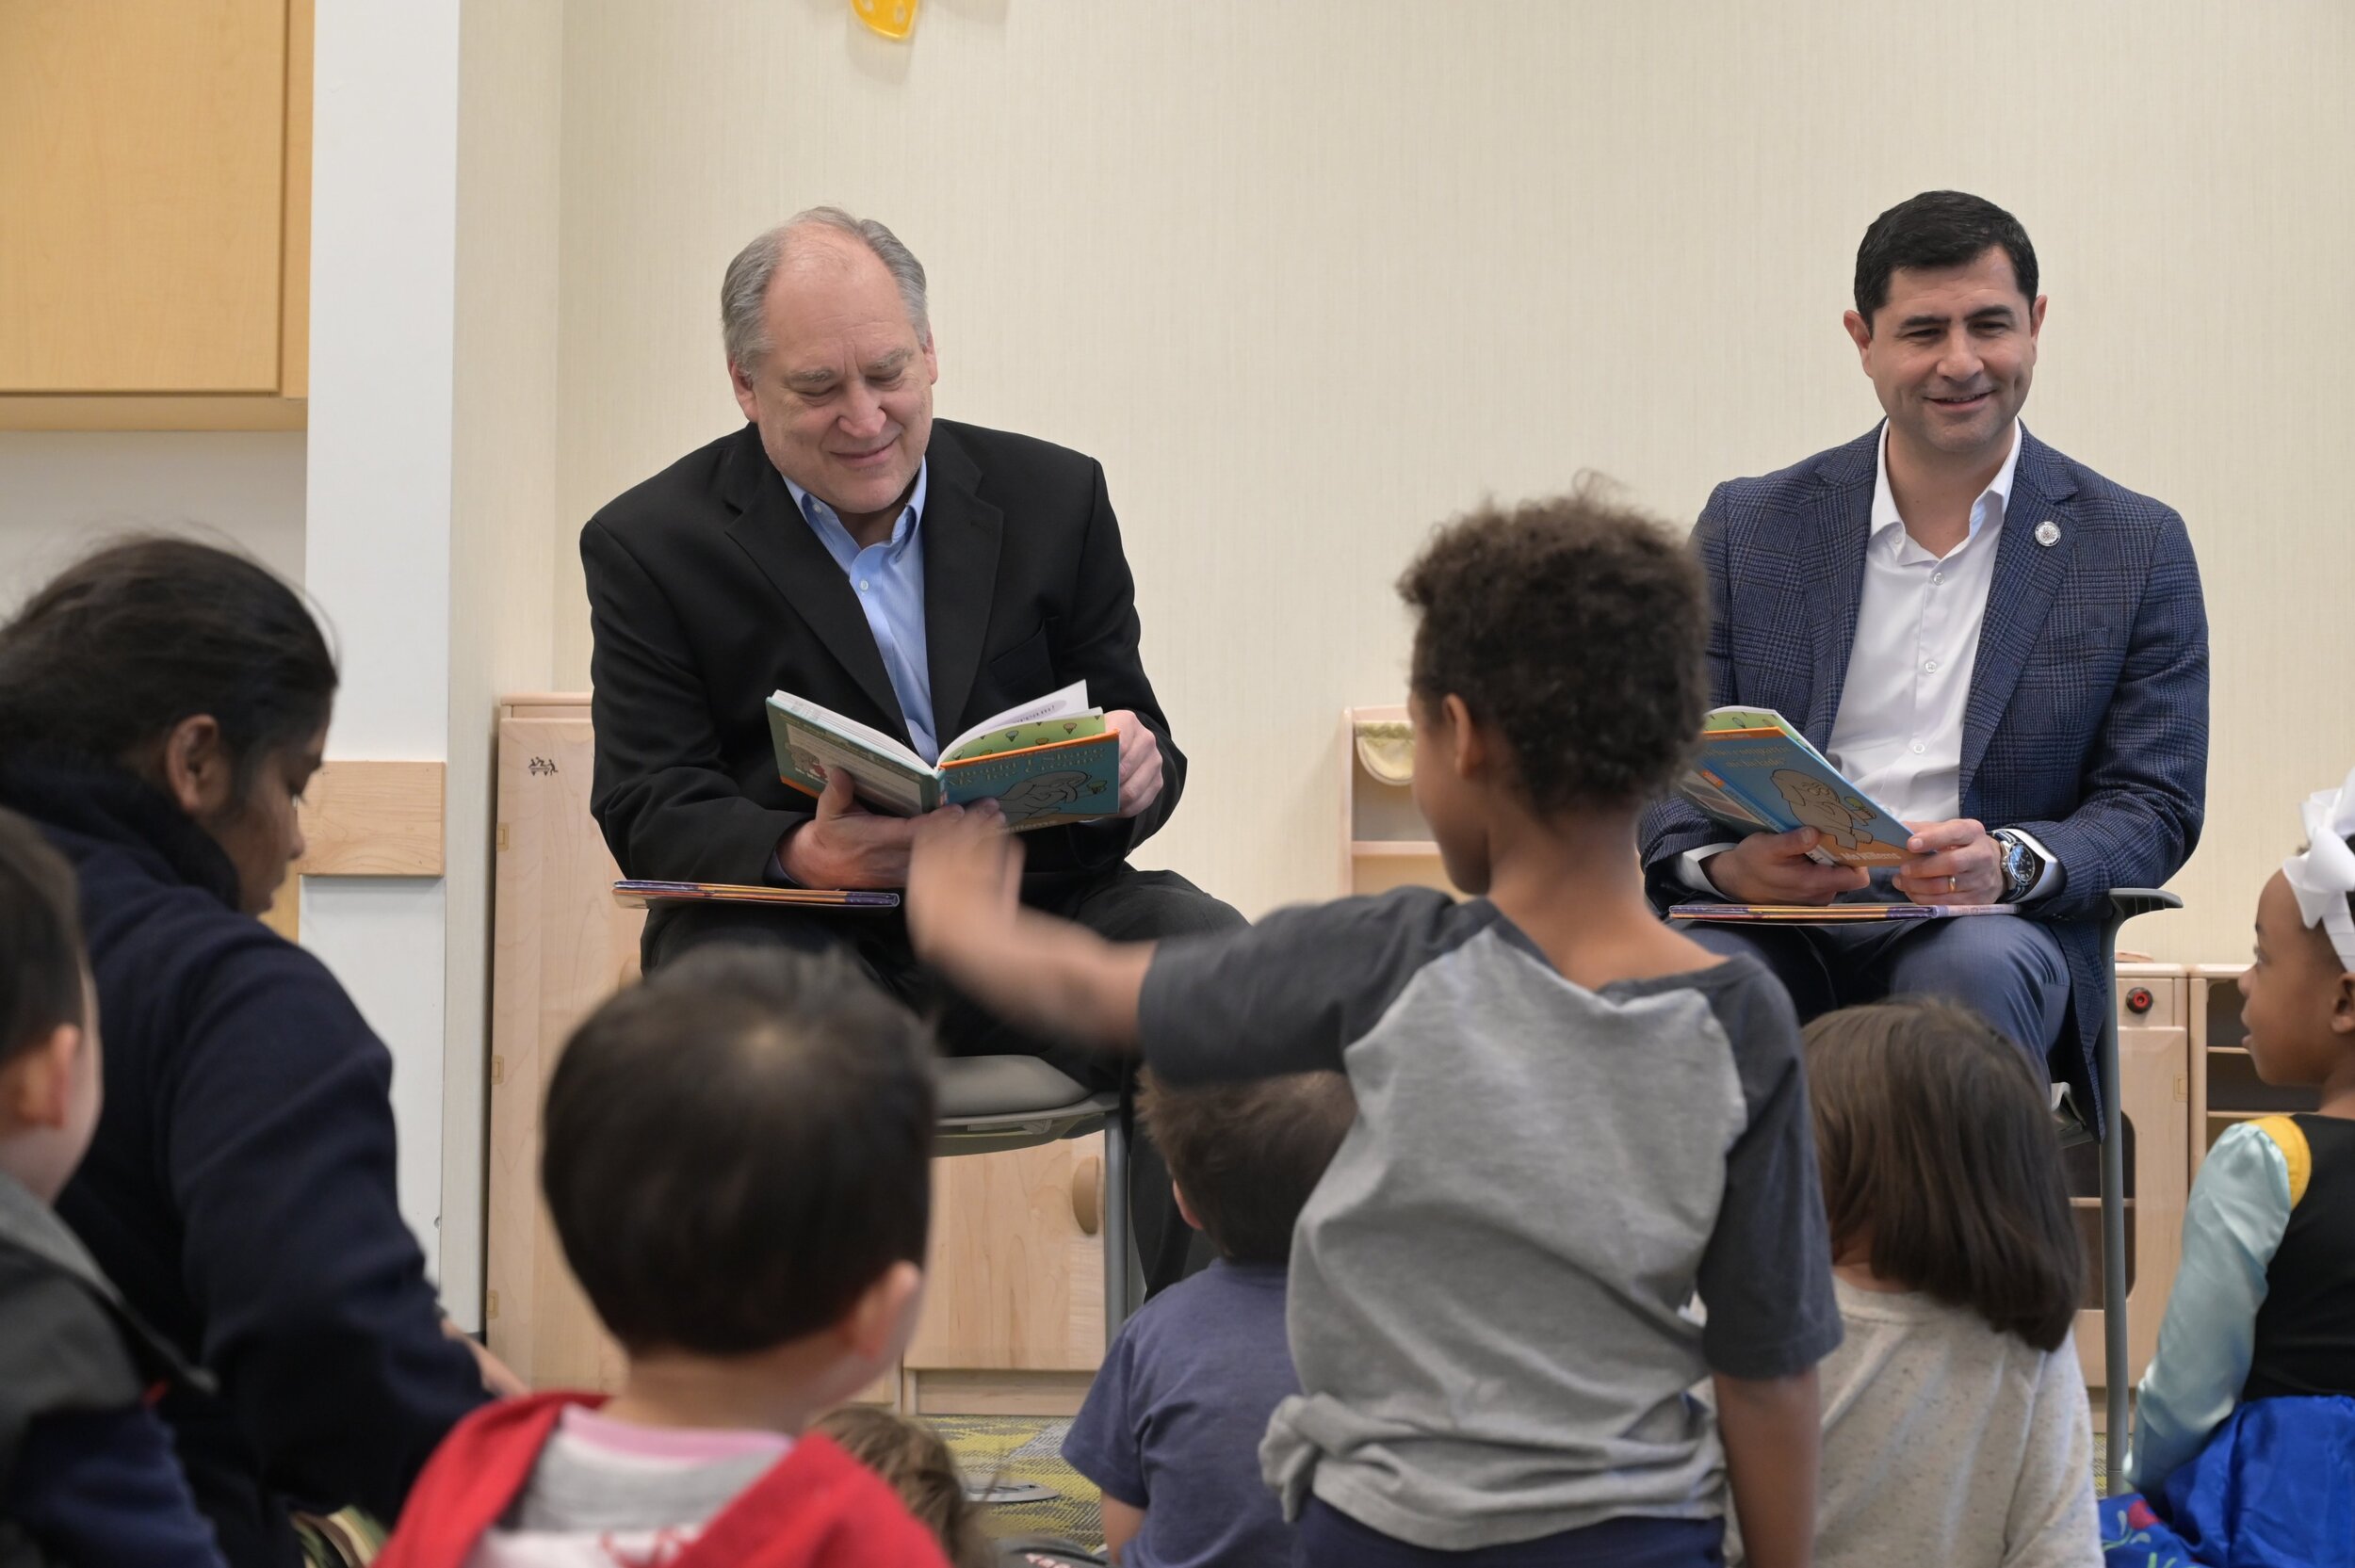 Montgomery County Executive Marc Elrich and Councilmember Gabe Albornoz led storytime in English and Spanish.